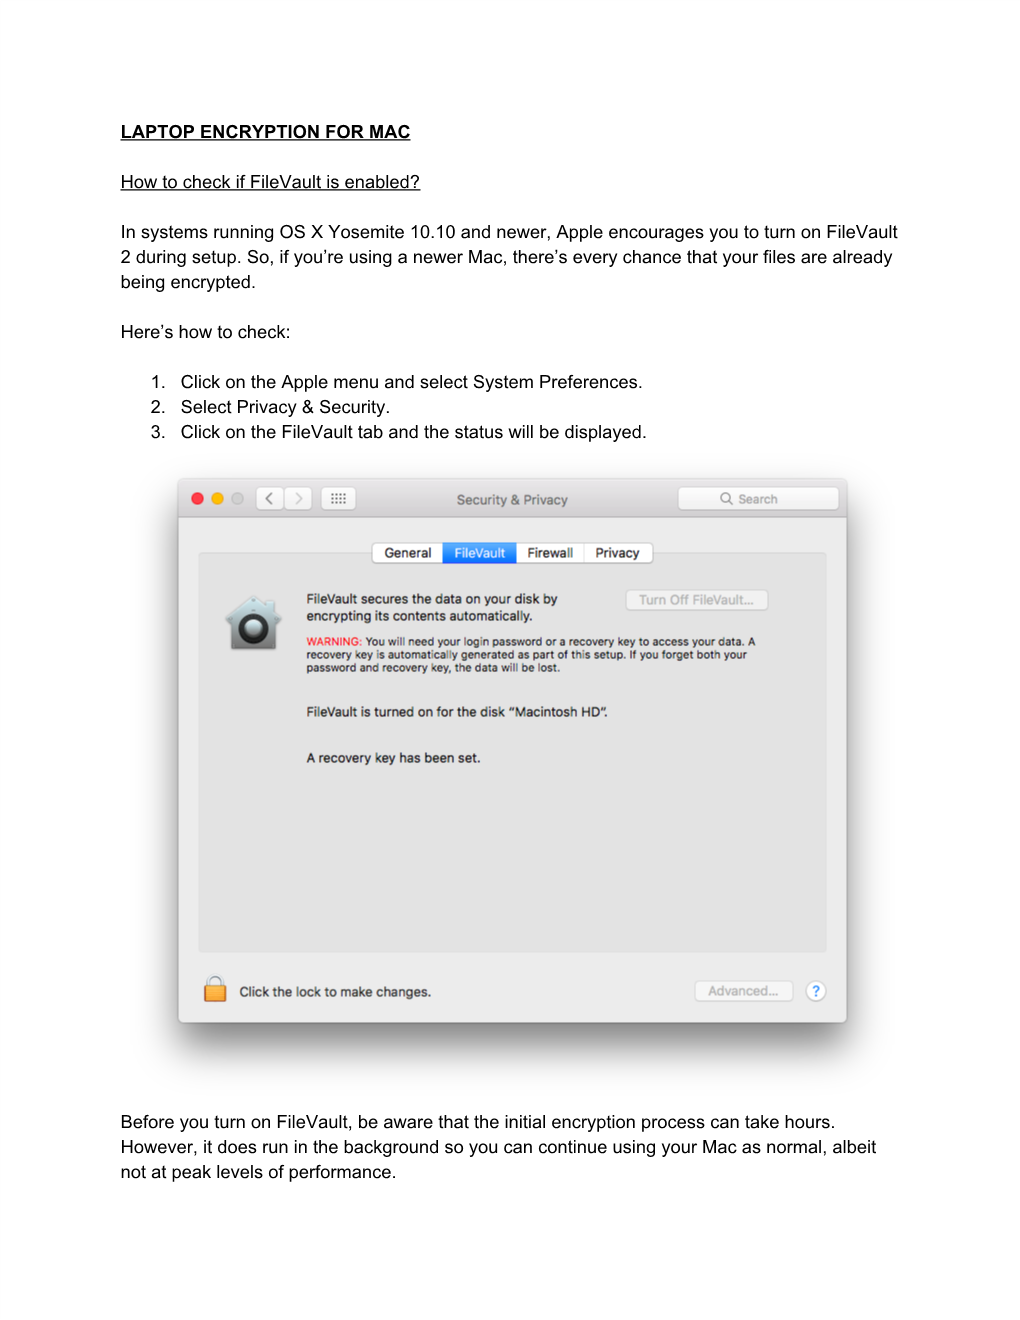 LAPTOP ENCRYPTION for MAC How to Check If Filevault Is Enabled